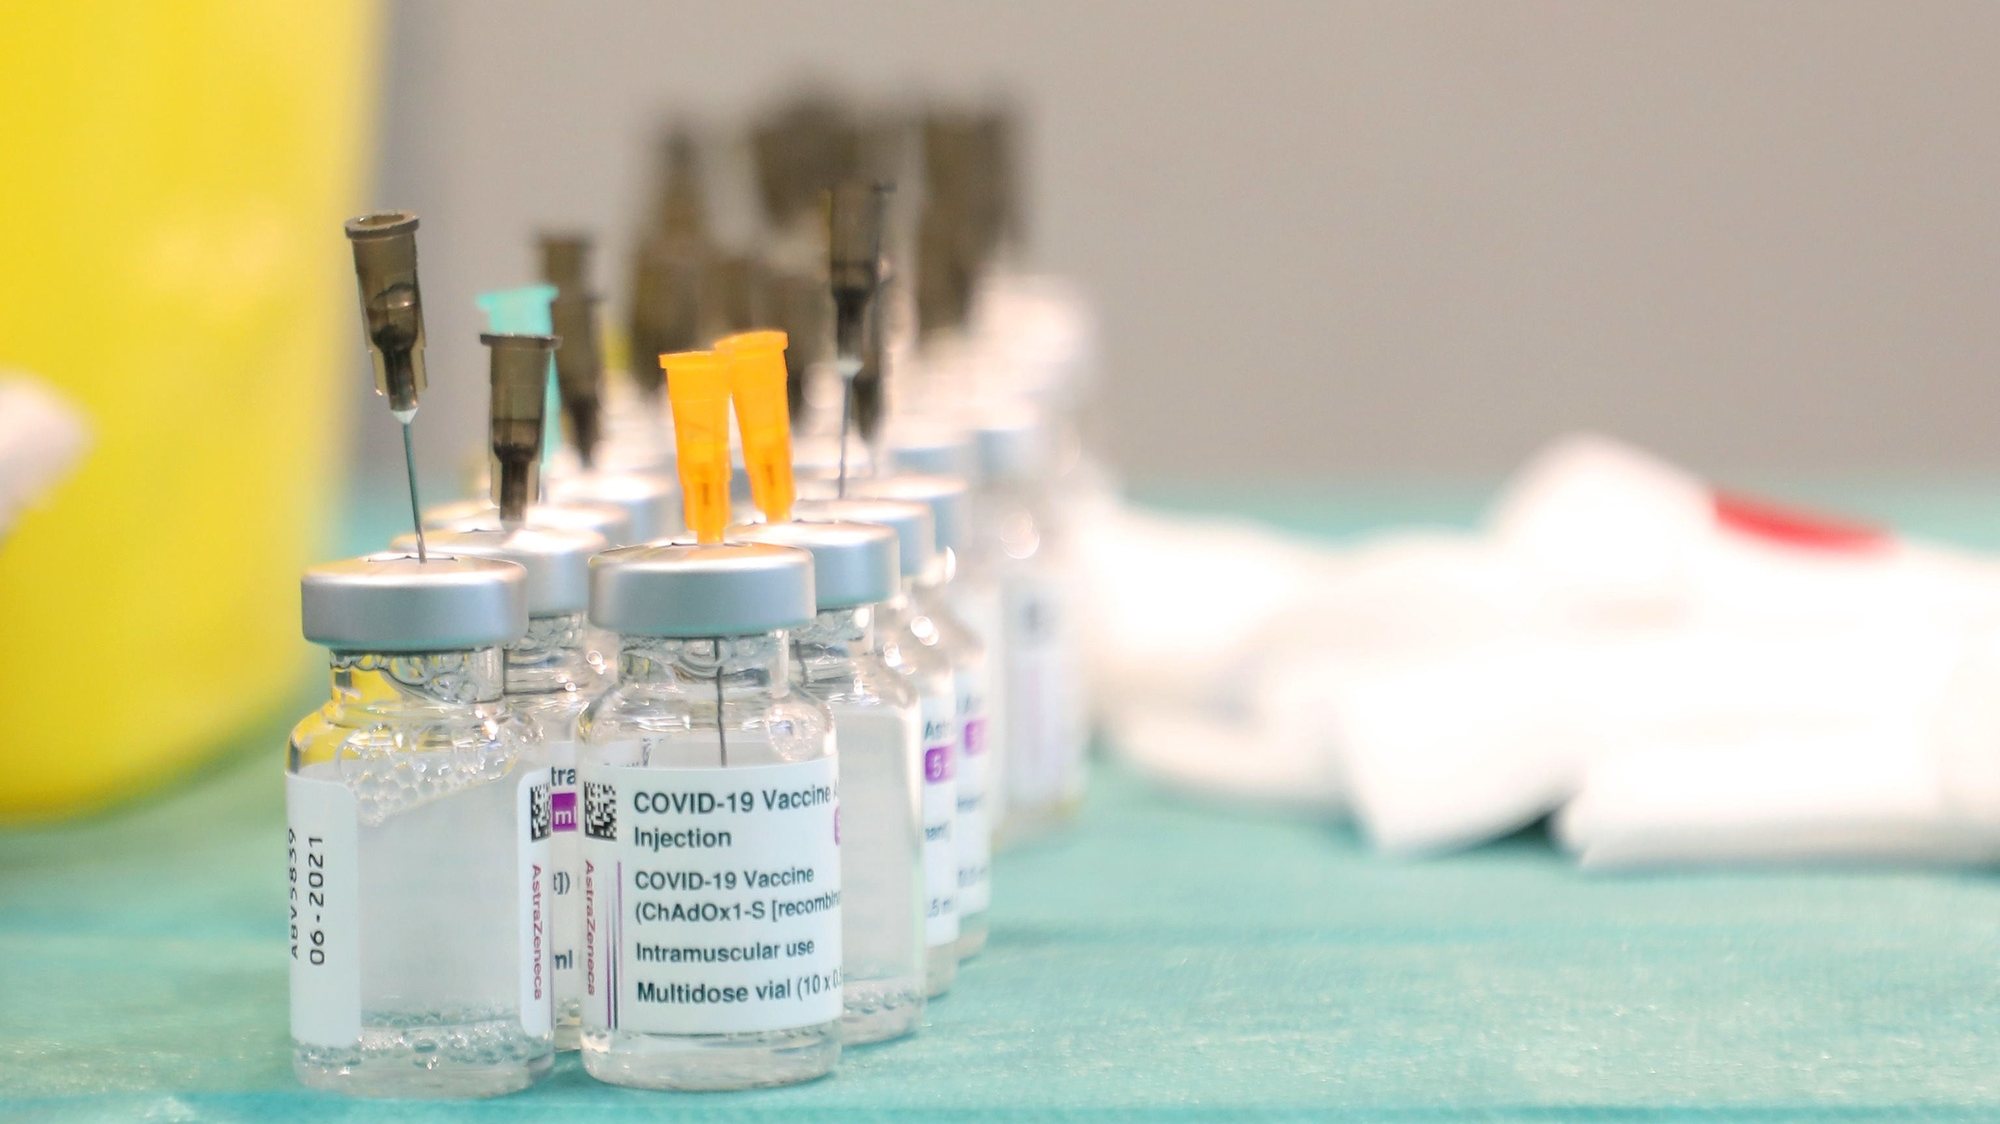 epa09130400 Vials are prepared for injections at the COVID19 vaccination hub that has been set up at villa Erba in Cernobbio, near Como, northern Italy, 12 April 2021. Some 2.2 million doses of COVID-19 vaccines are set to arrive in Italy this week, health sources said on 12 April 2021.  EPA/MATTEO BAZZI